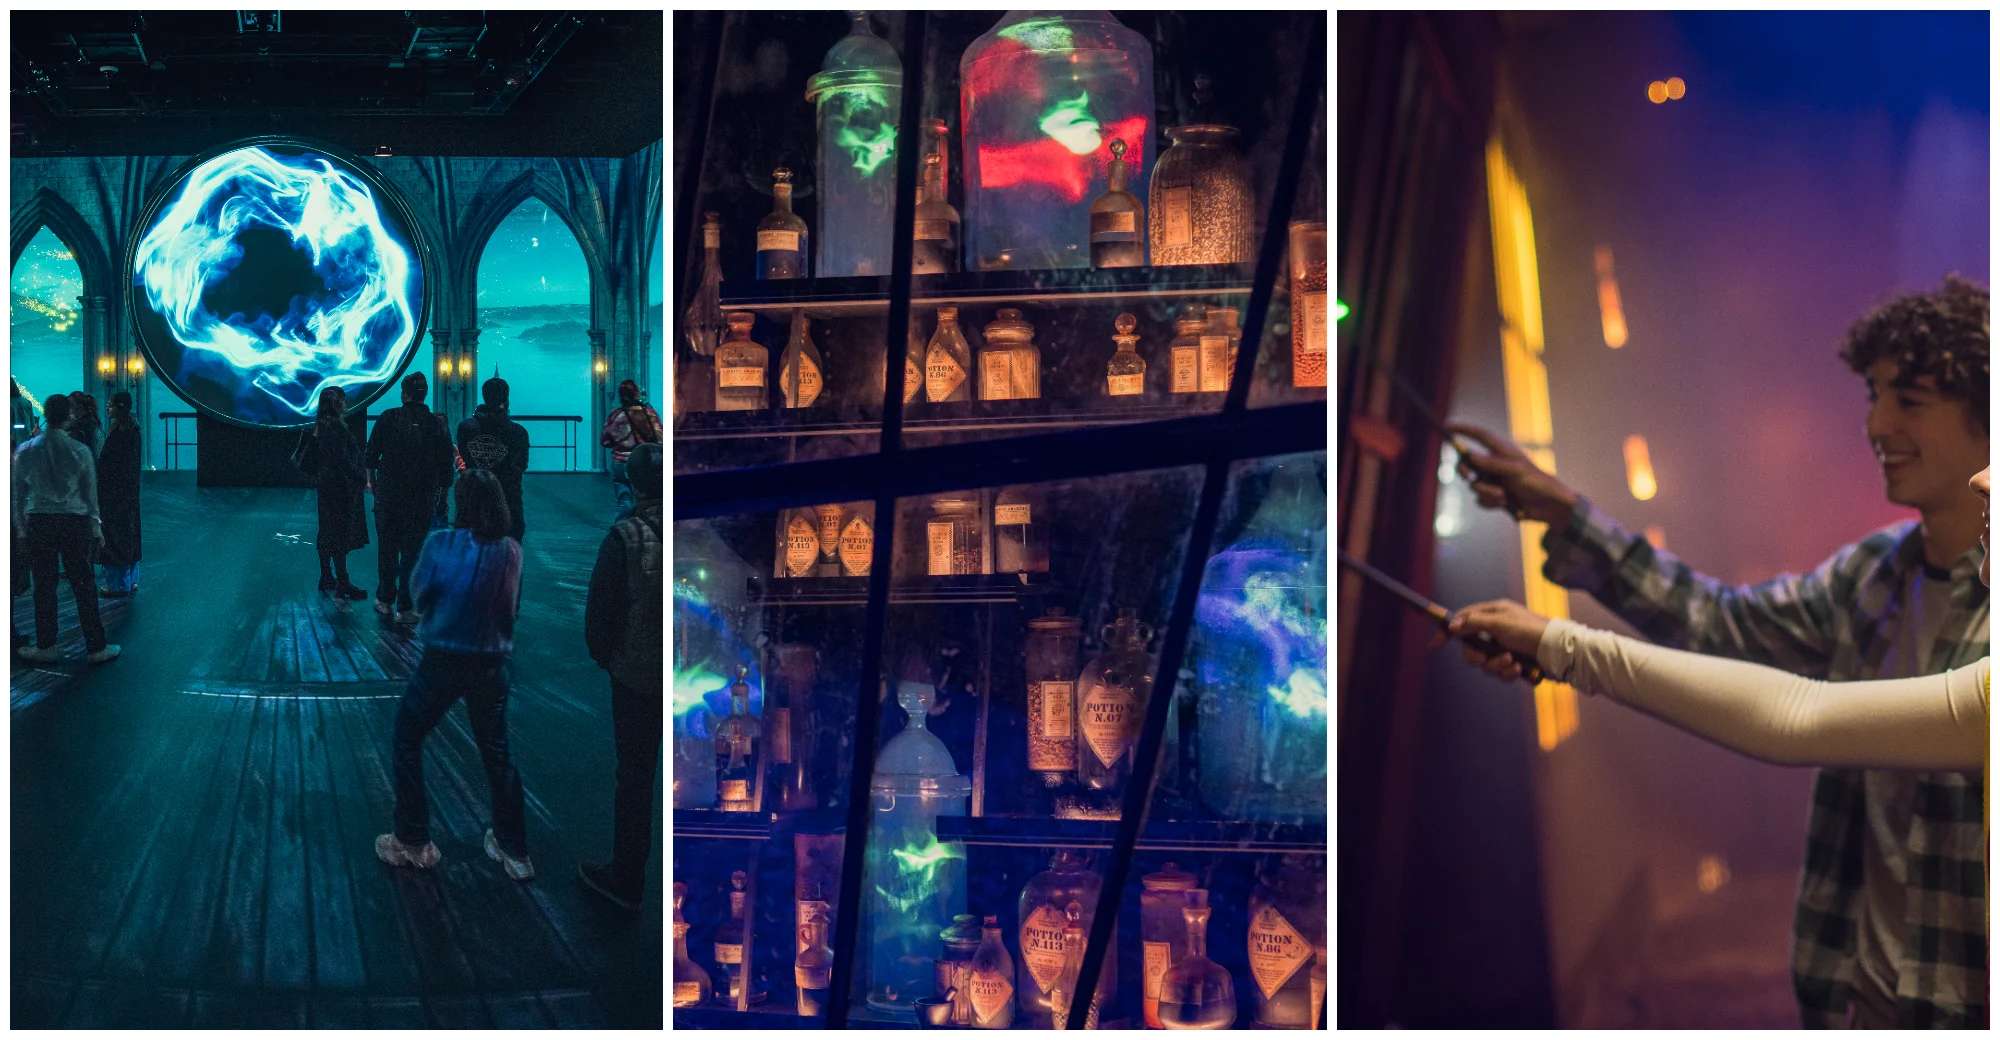 Harry Potter: Visions Of Magic Is Coming To Singapore